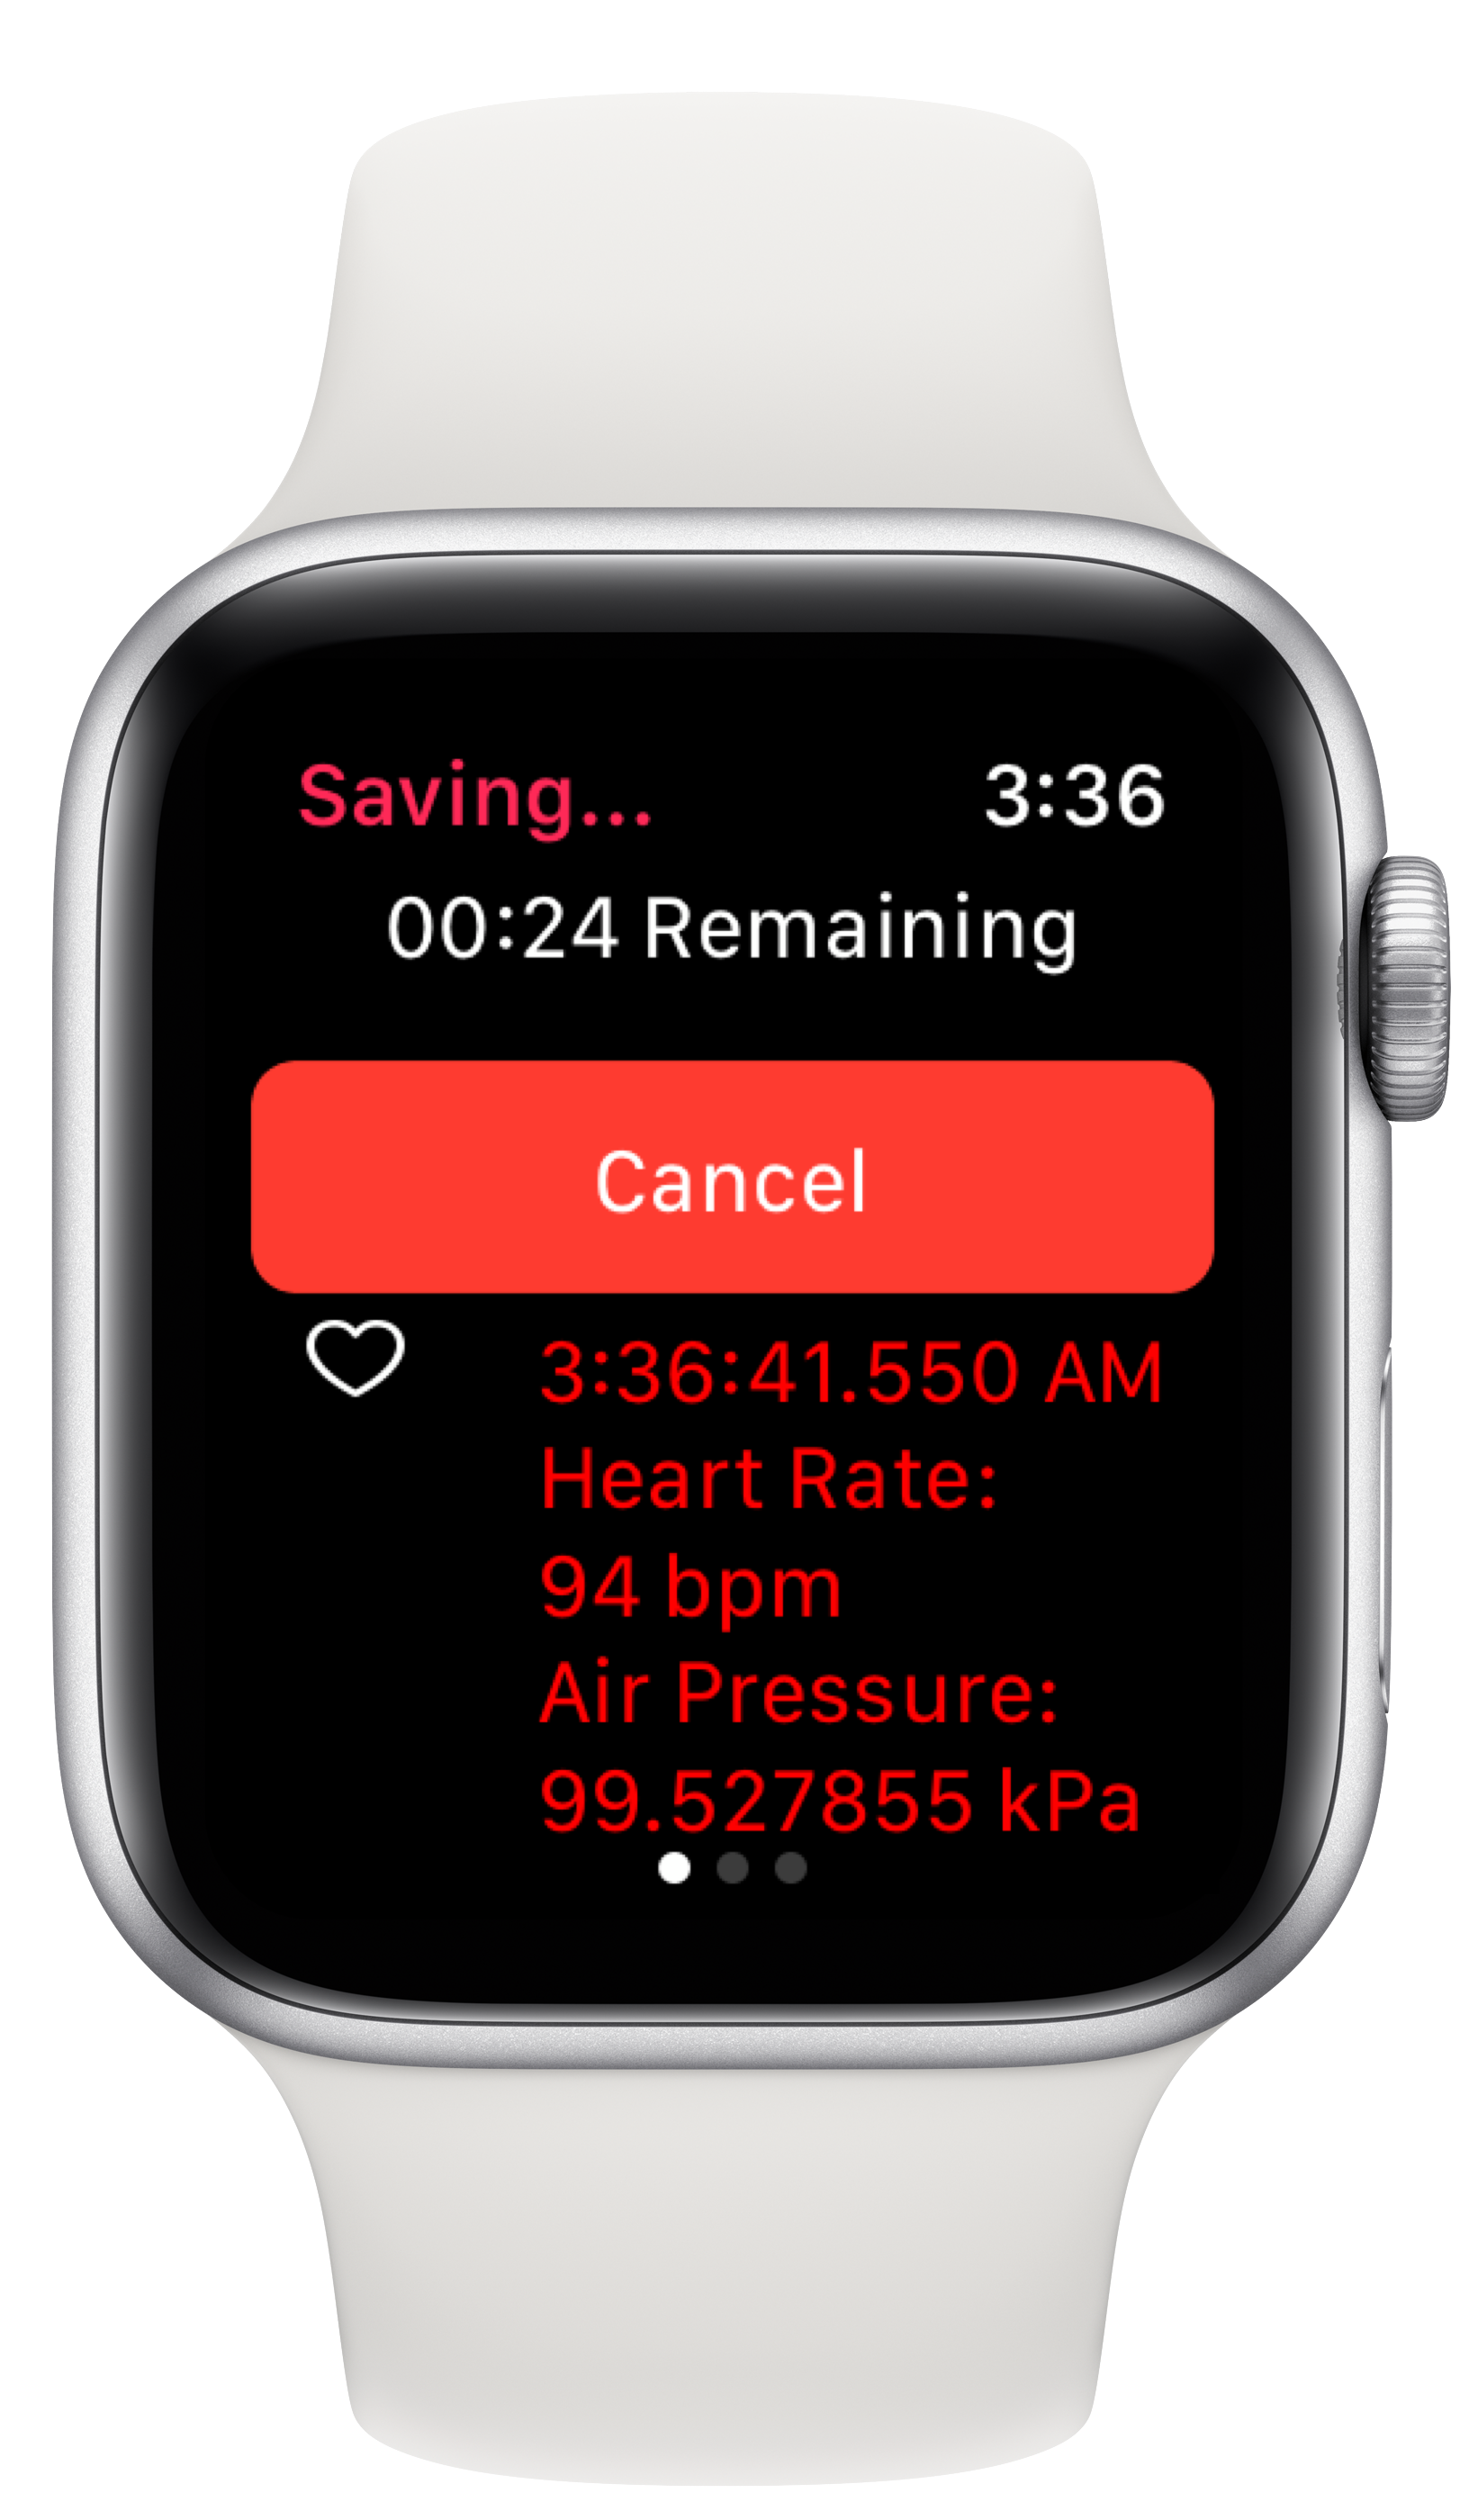 HeartCloud Sync Apple Watch app on Apple Watch with white band showing a countdown timer (24 seconds left), heart rate bpm and air pressure kPa data in red